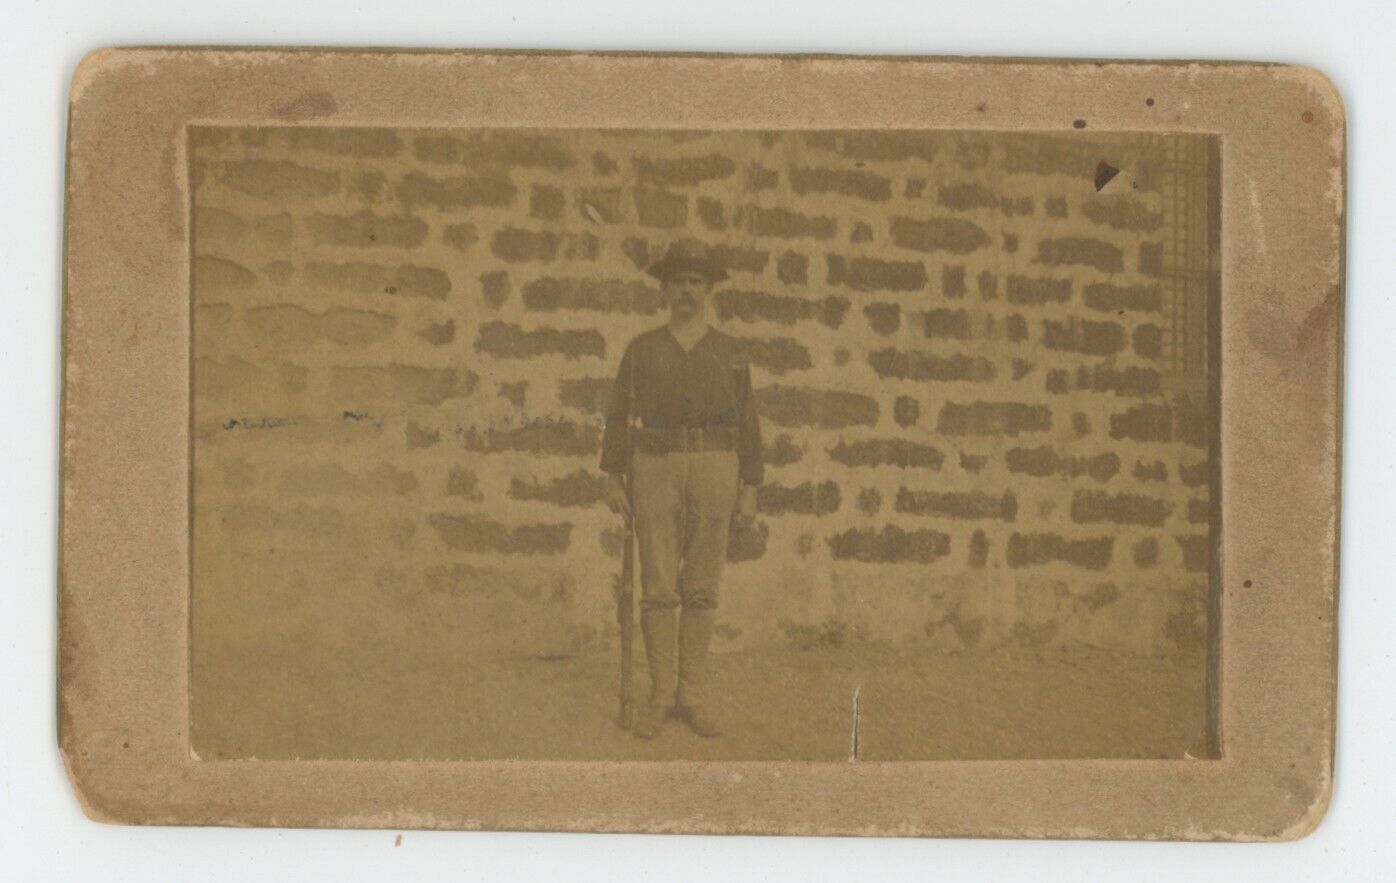 Antique CDV Circa 1900s Incredible Image of Soldier With His Gun by Brick Wall